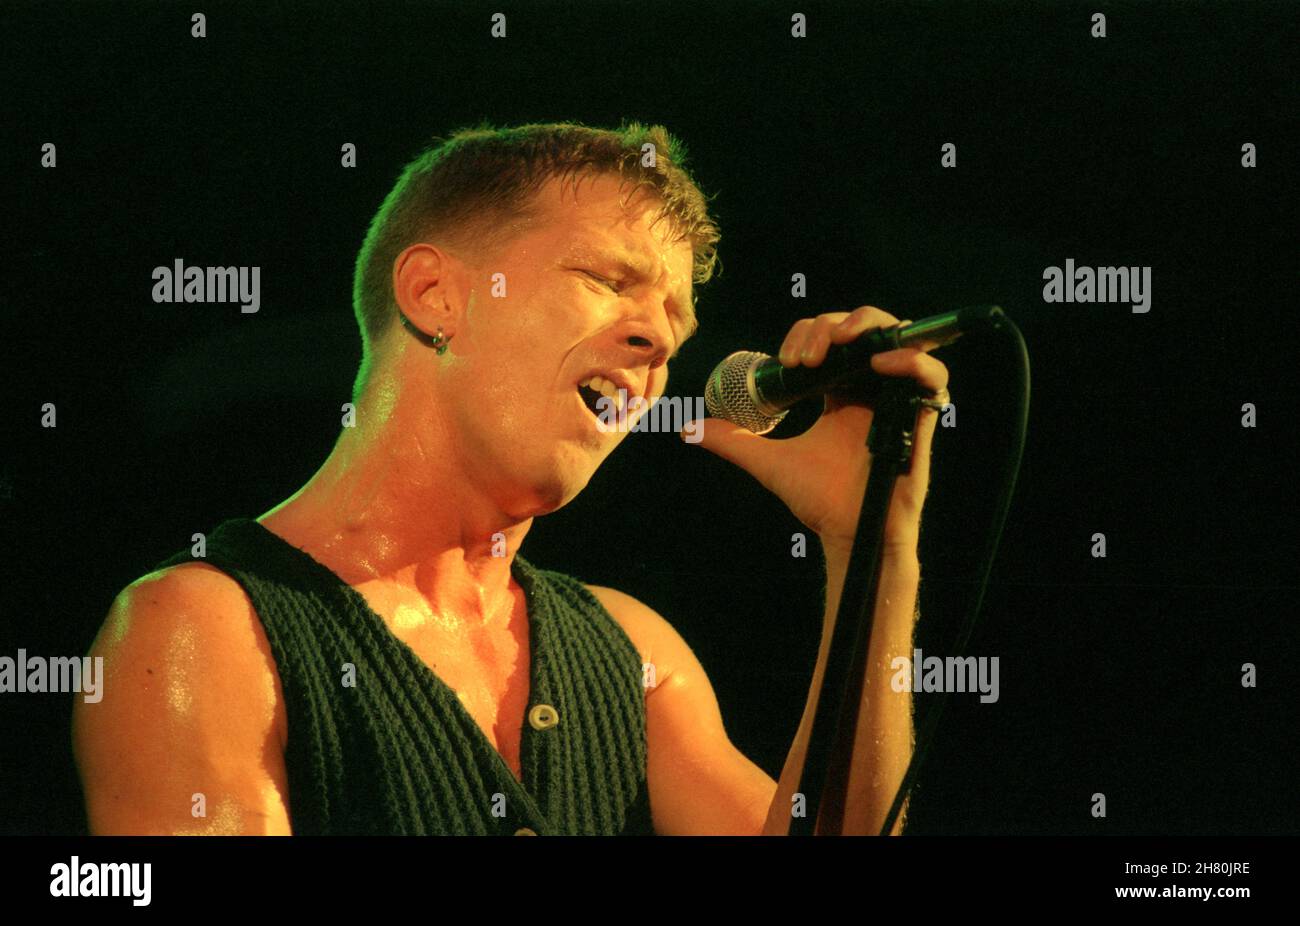 The Stranglers concert, Wembley Arena, London, 26/3/1994 - Paul Roberts, lead vocalist from 1990-2006, singing live on stage Stock Photo